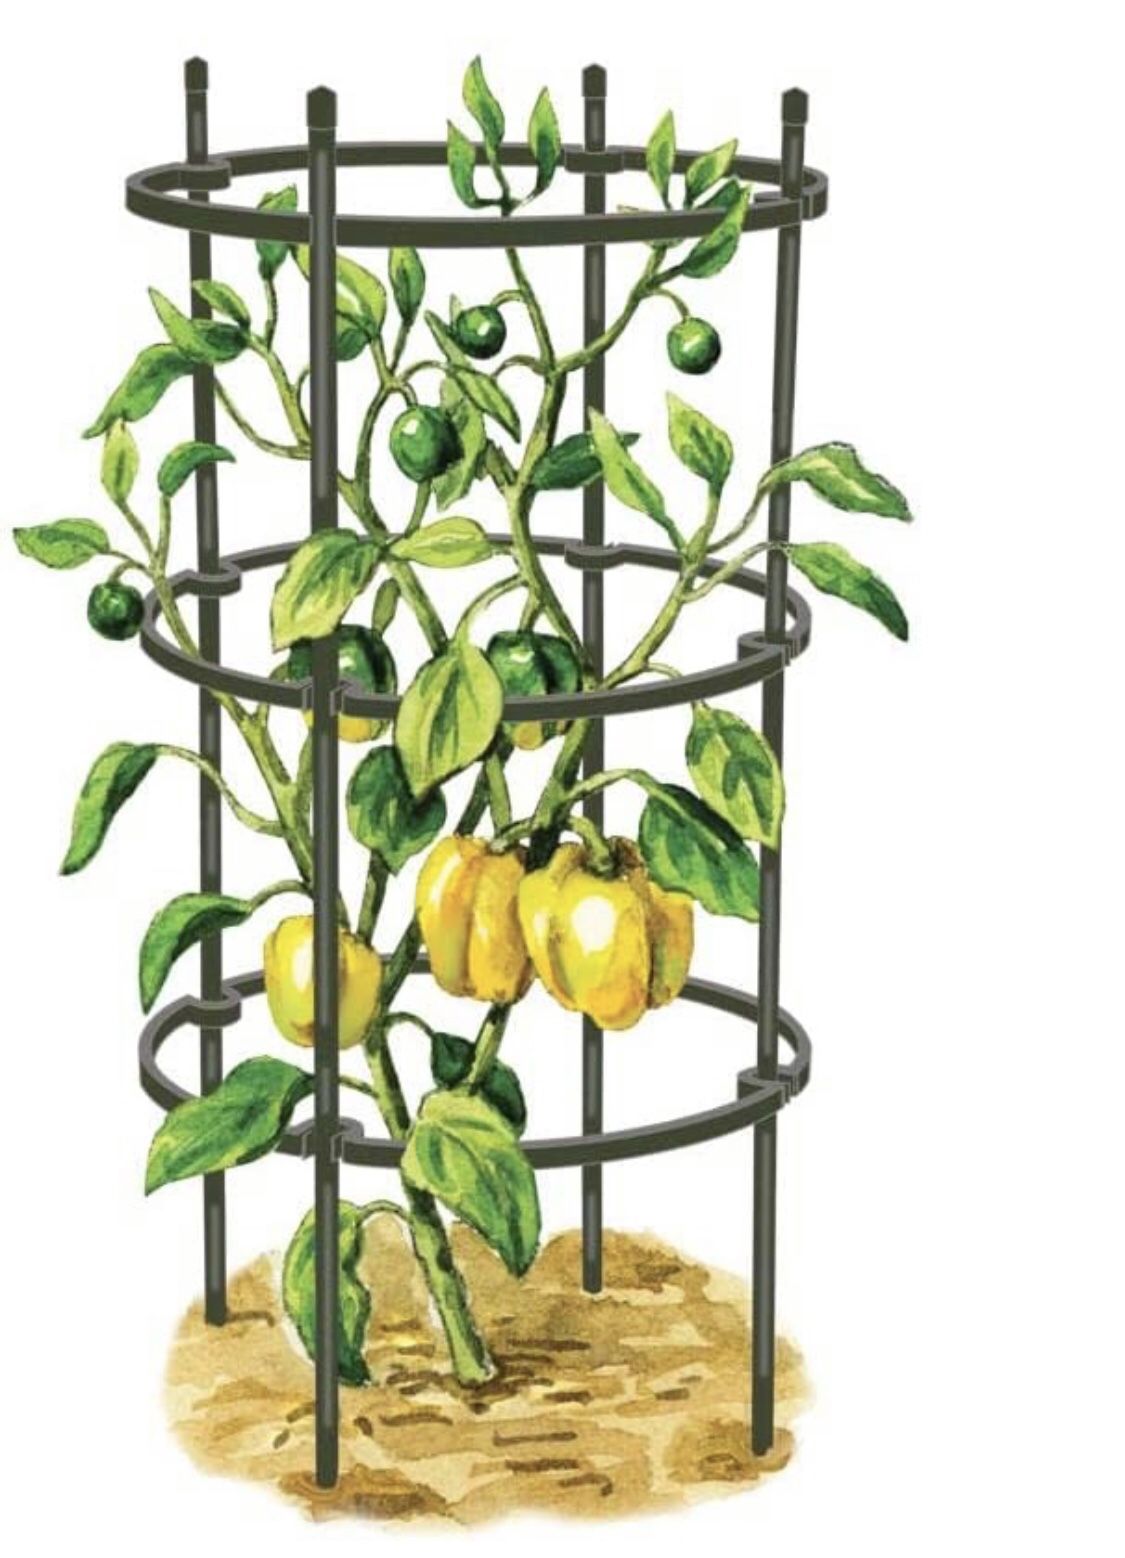 Gardeners Supply Company Pepper and Eggplant Cages Plant Stand | Sturdy & Adjustable Garden Plants Support for Eggplants Peppers & Other Fruit Bearing